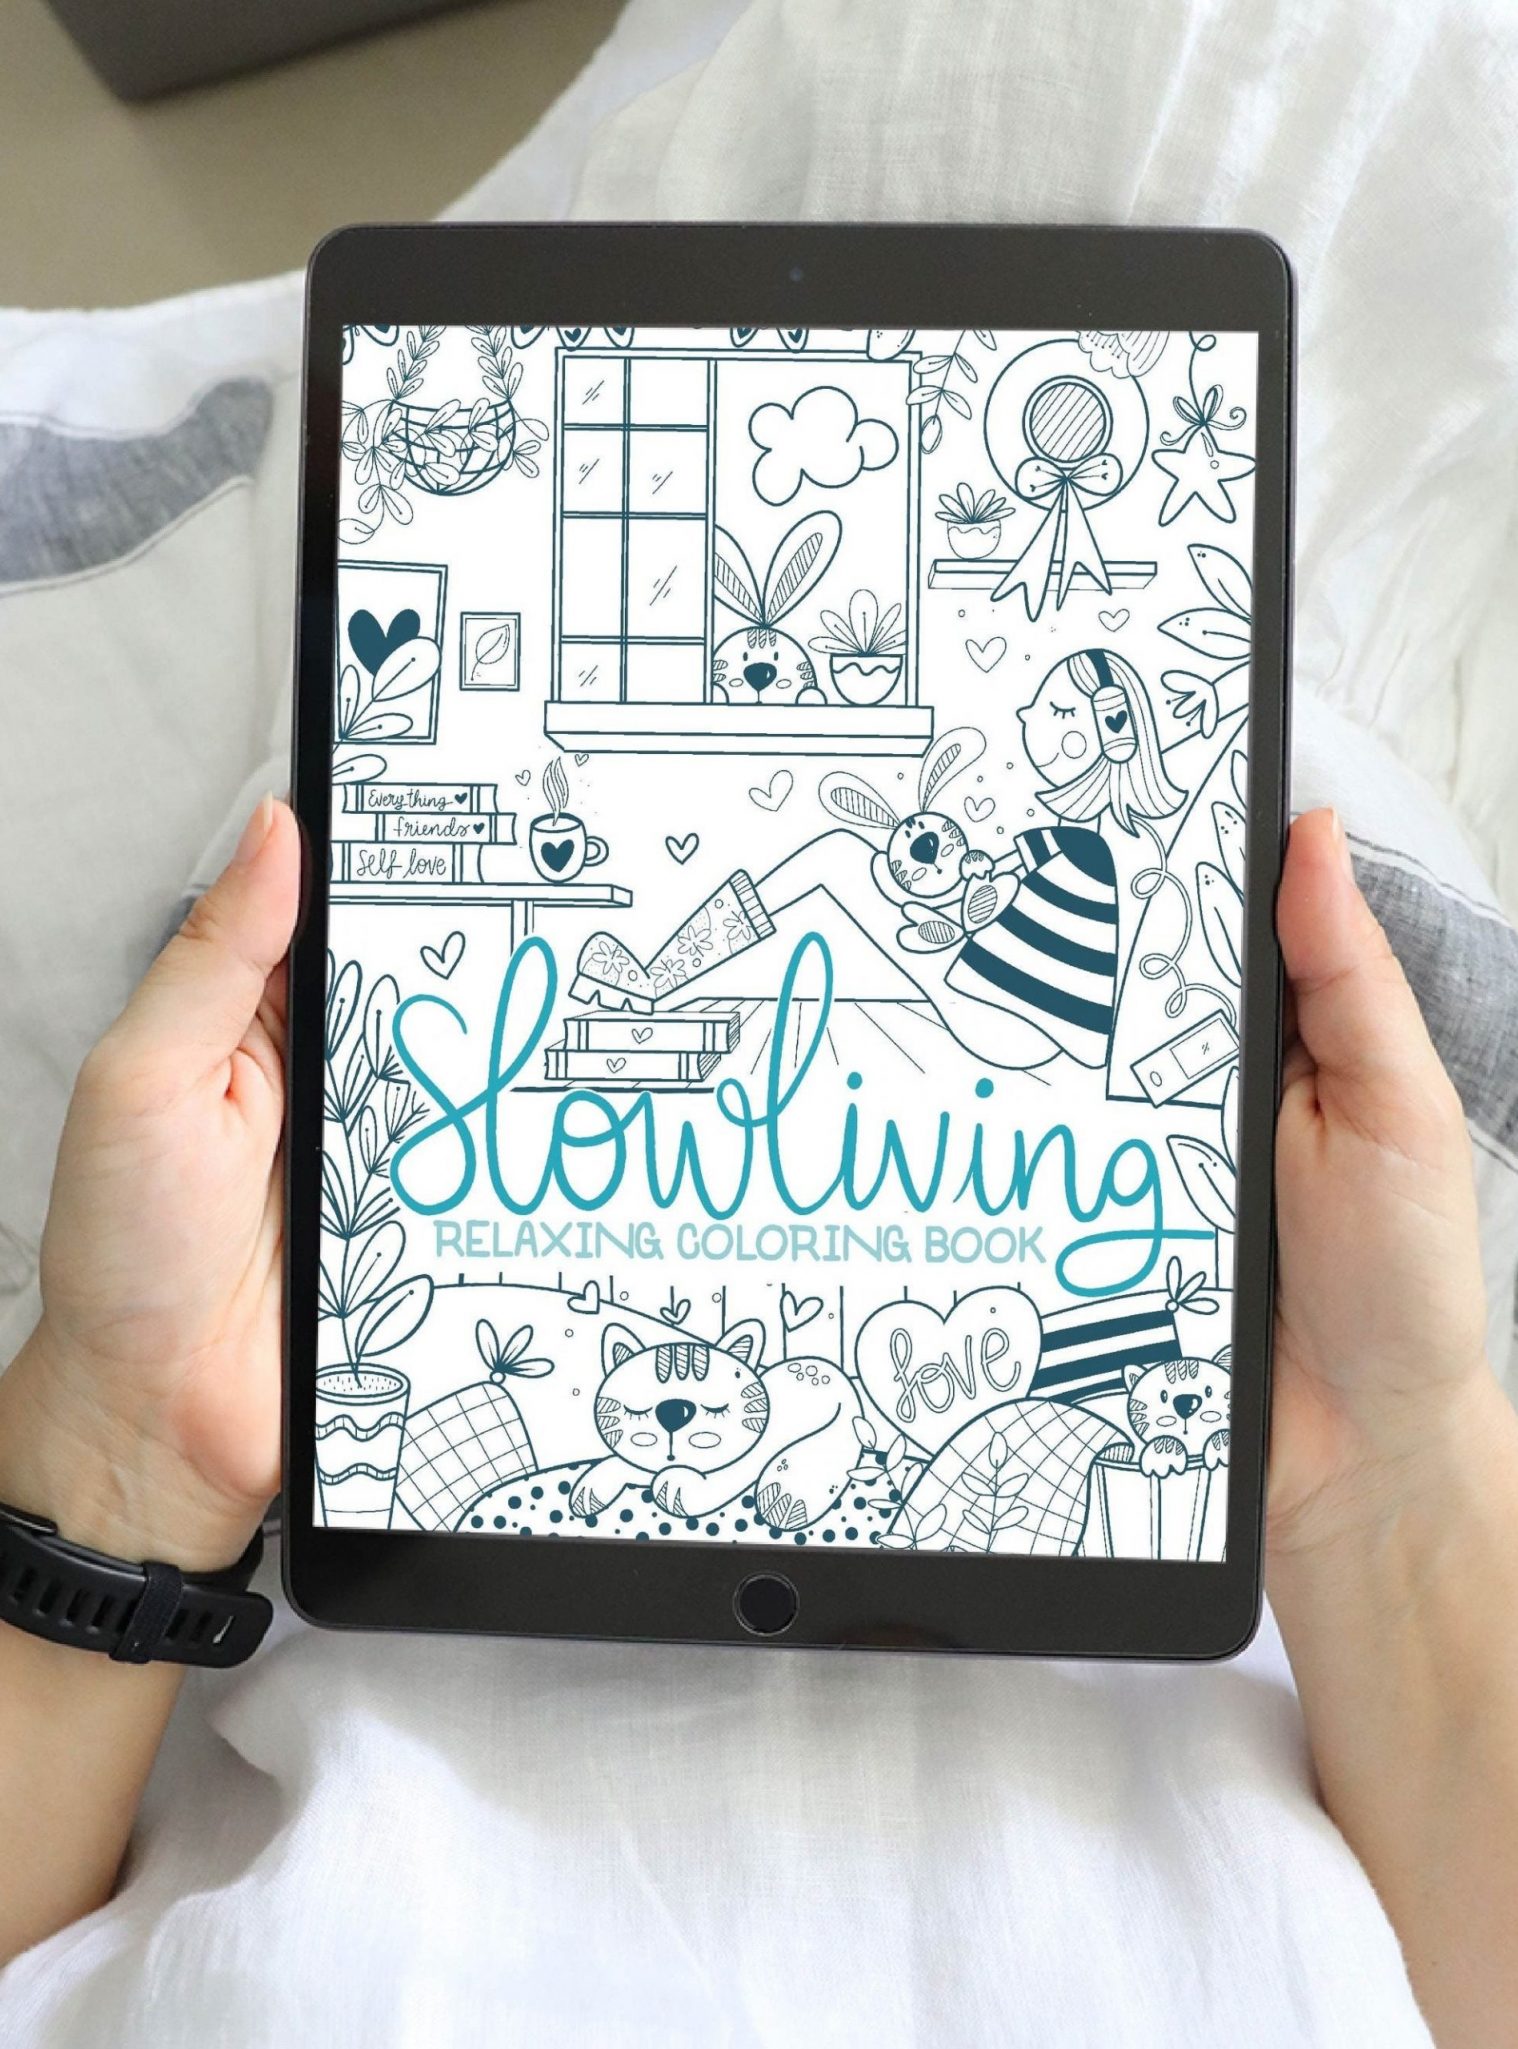 SLOWLIVING Digital Coloring Book for Adults | ADHD Relaxing and focus practice |Anxiety Relief Gift | Soothing Digital Coloring | M040